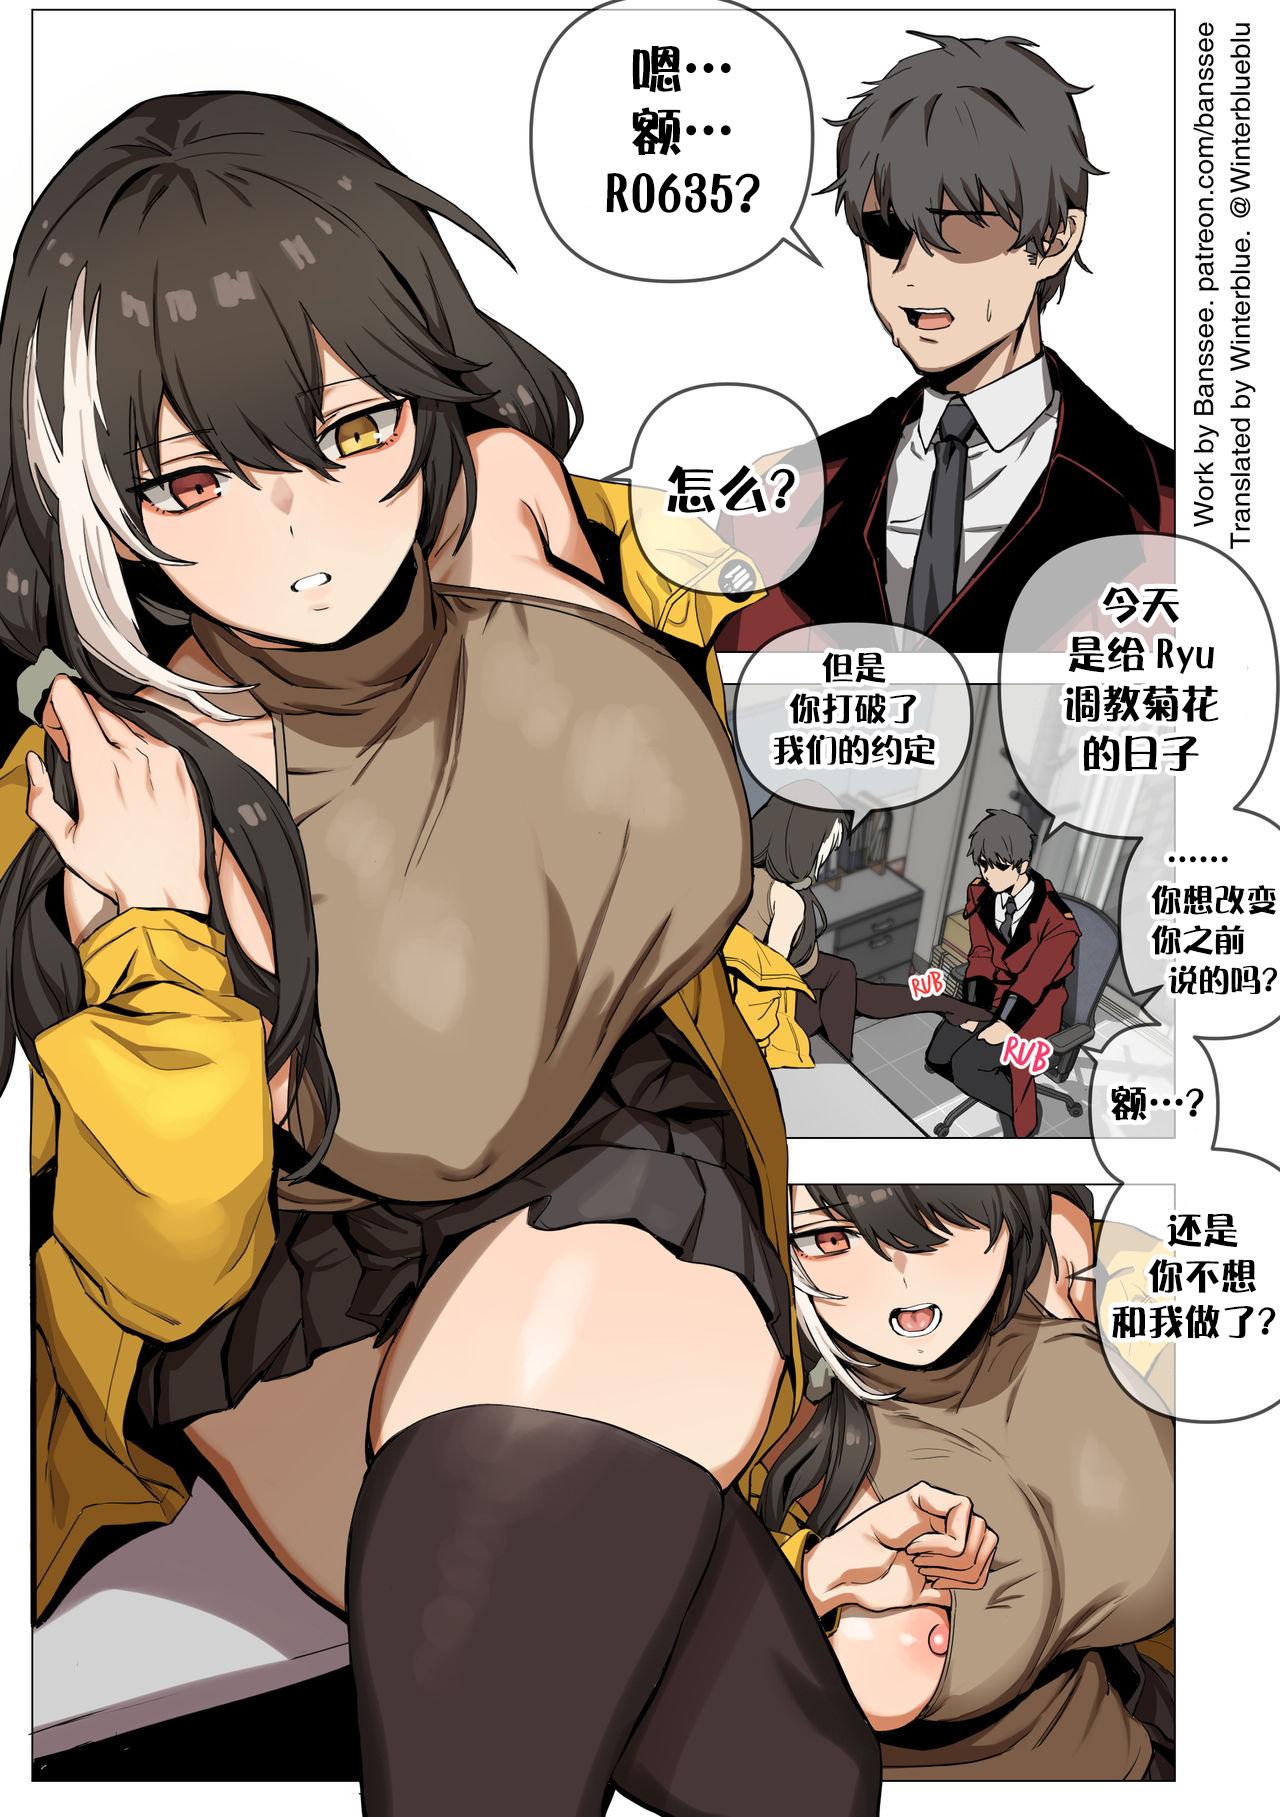 Titfuck RO635 - Girls frontline Two - Page 1